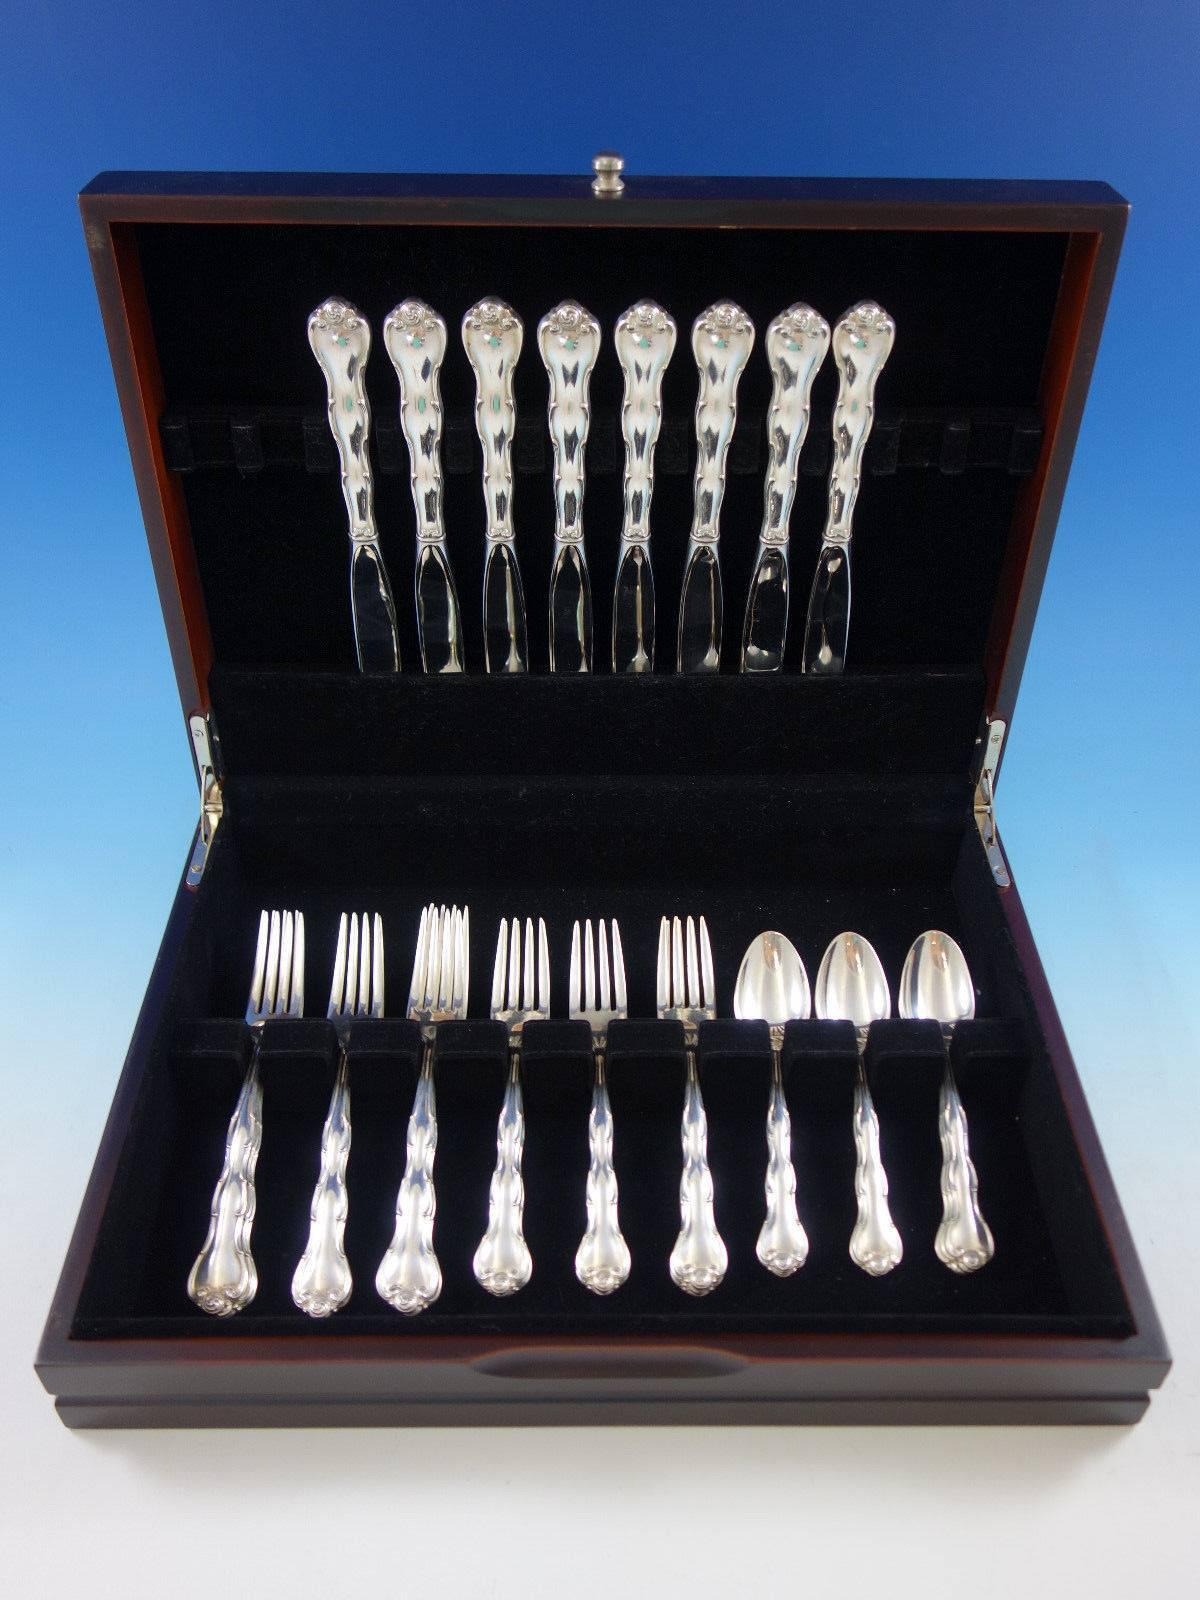 Rondo by Gorham sterling silver Flatware set, 32 pieces. This set includes 

eight knives, 8 7/8